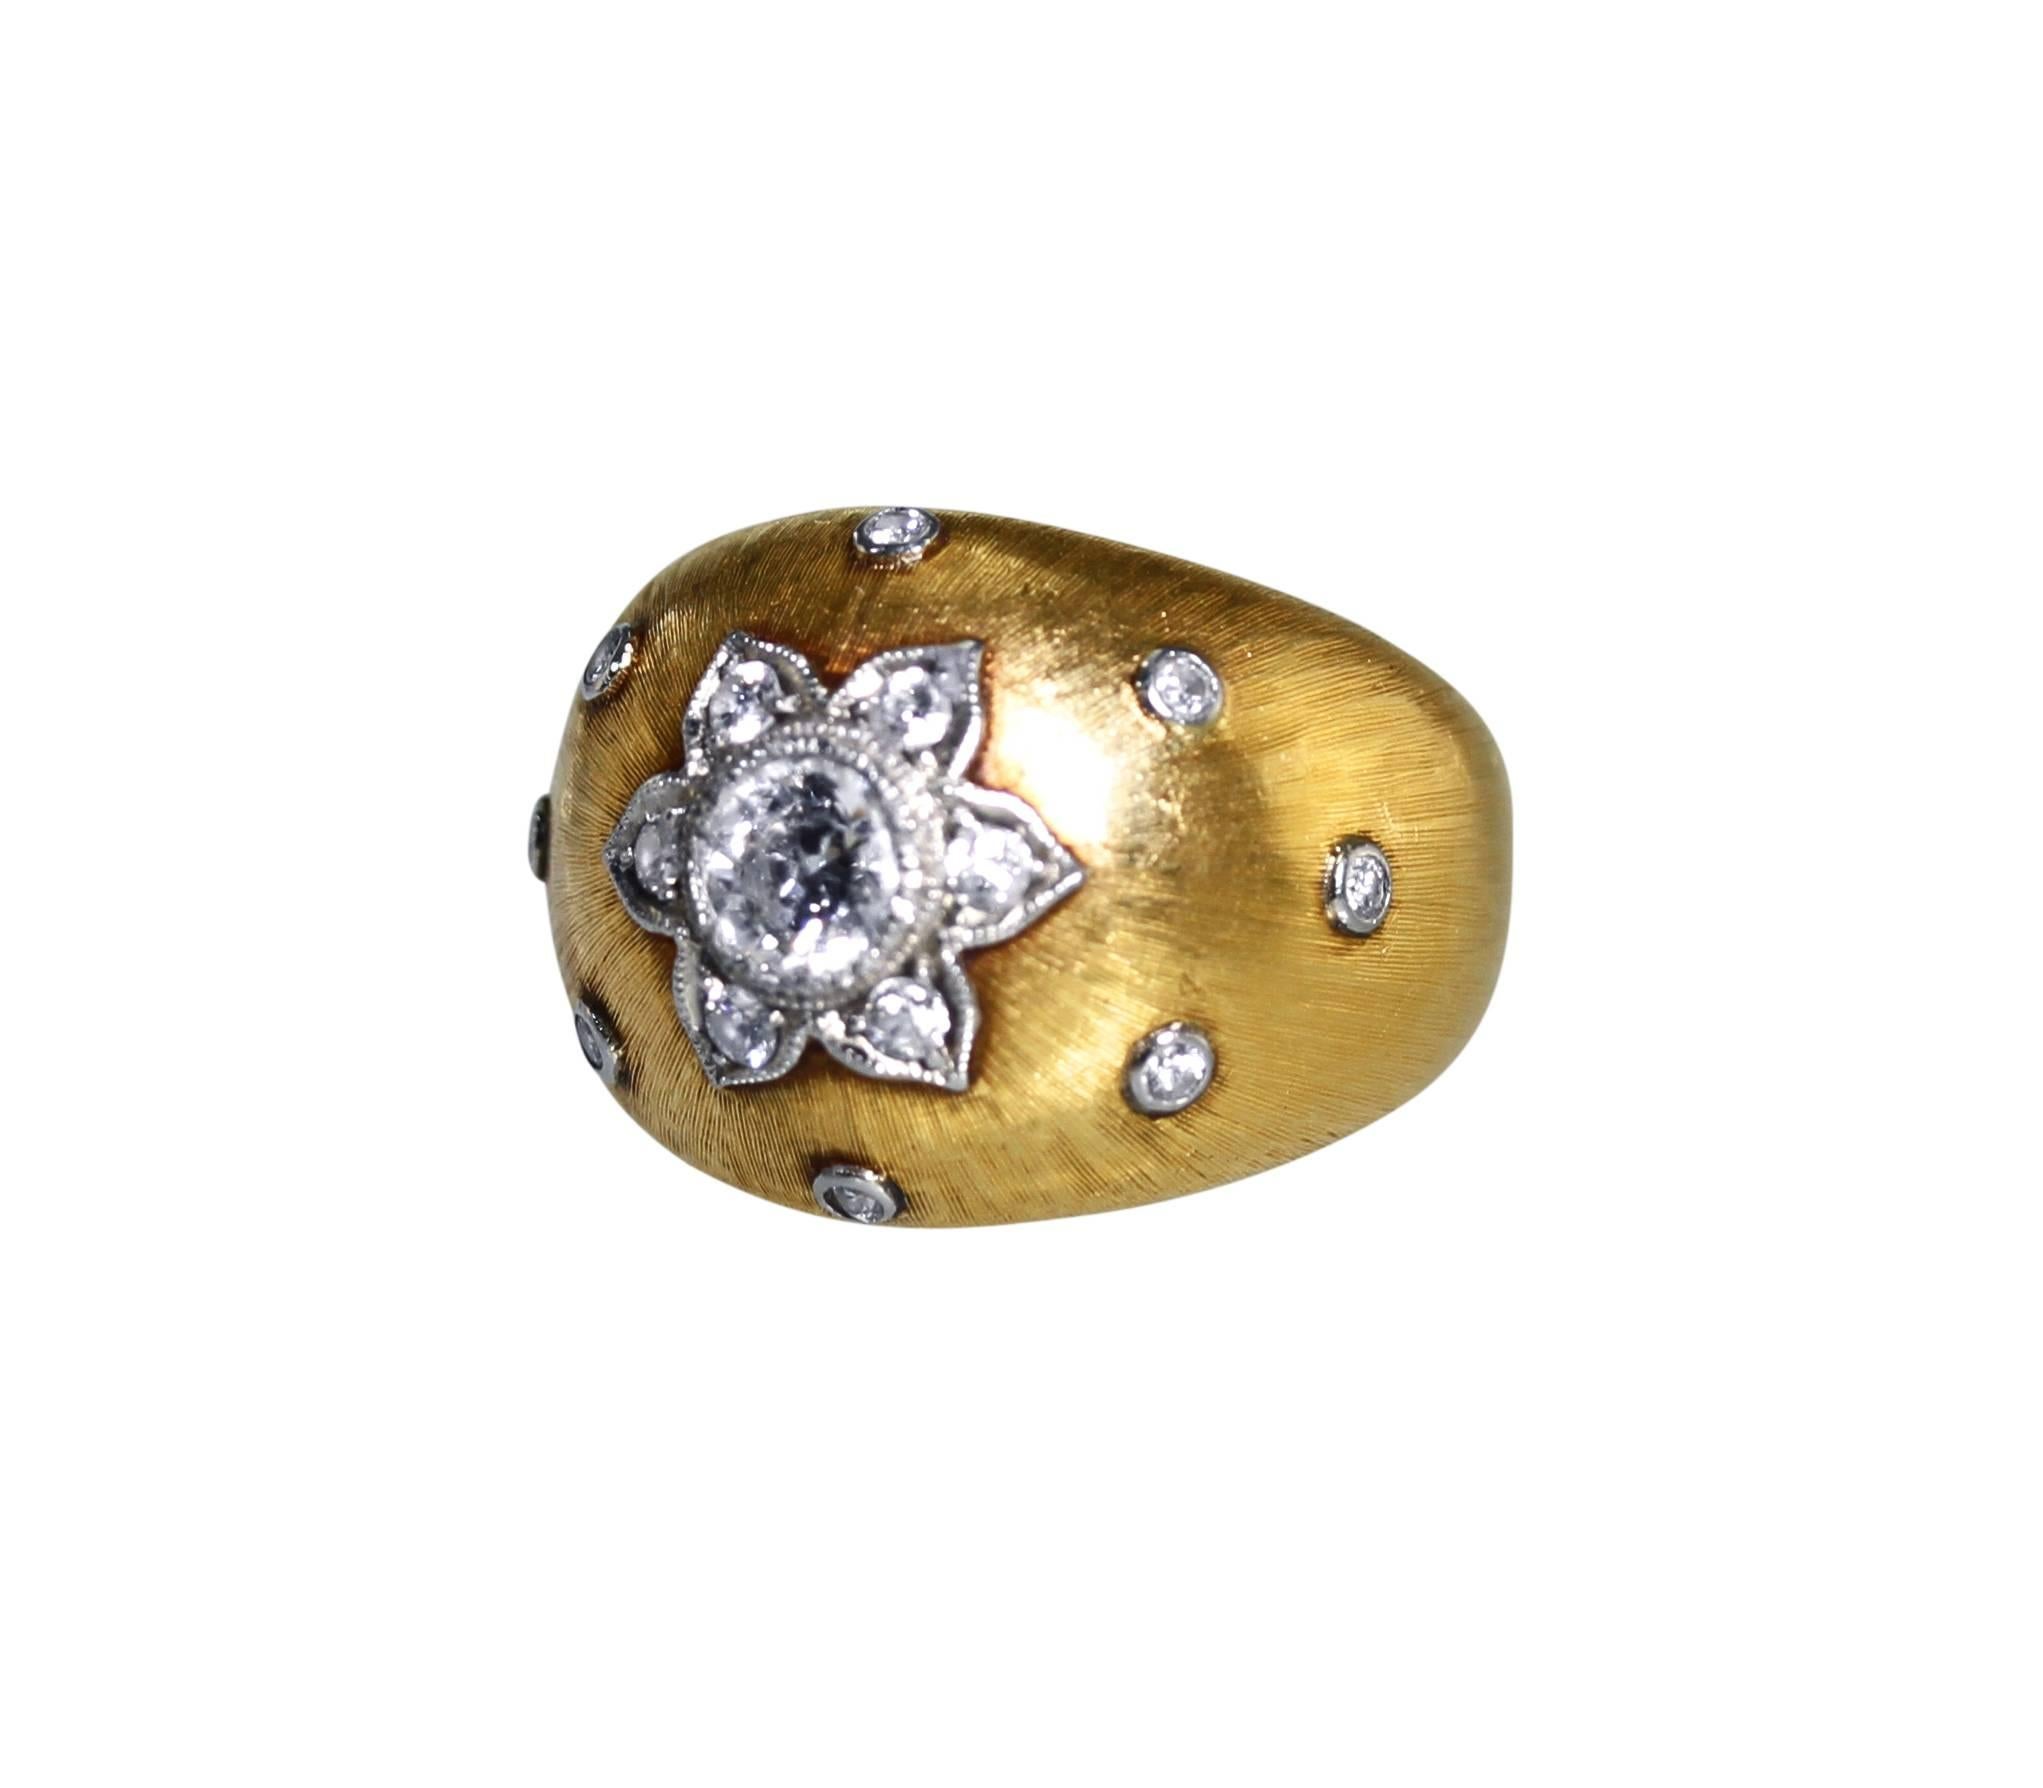 An 18 karat white and yellow gold and diamond ring by Buccellati, circa 1940, of bombe design set in the center with a round diamond weighing approximately 0.50 carat, accented by 14 round diamonds weighing approximately 0.20 carat, measuring 5/8 by